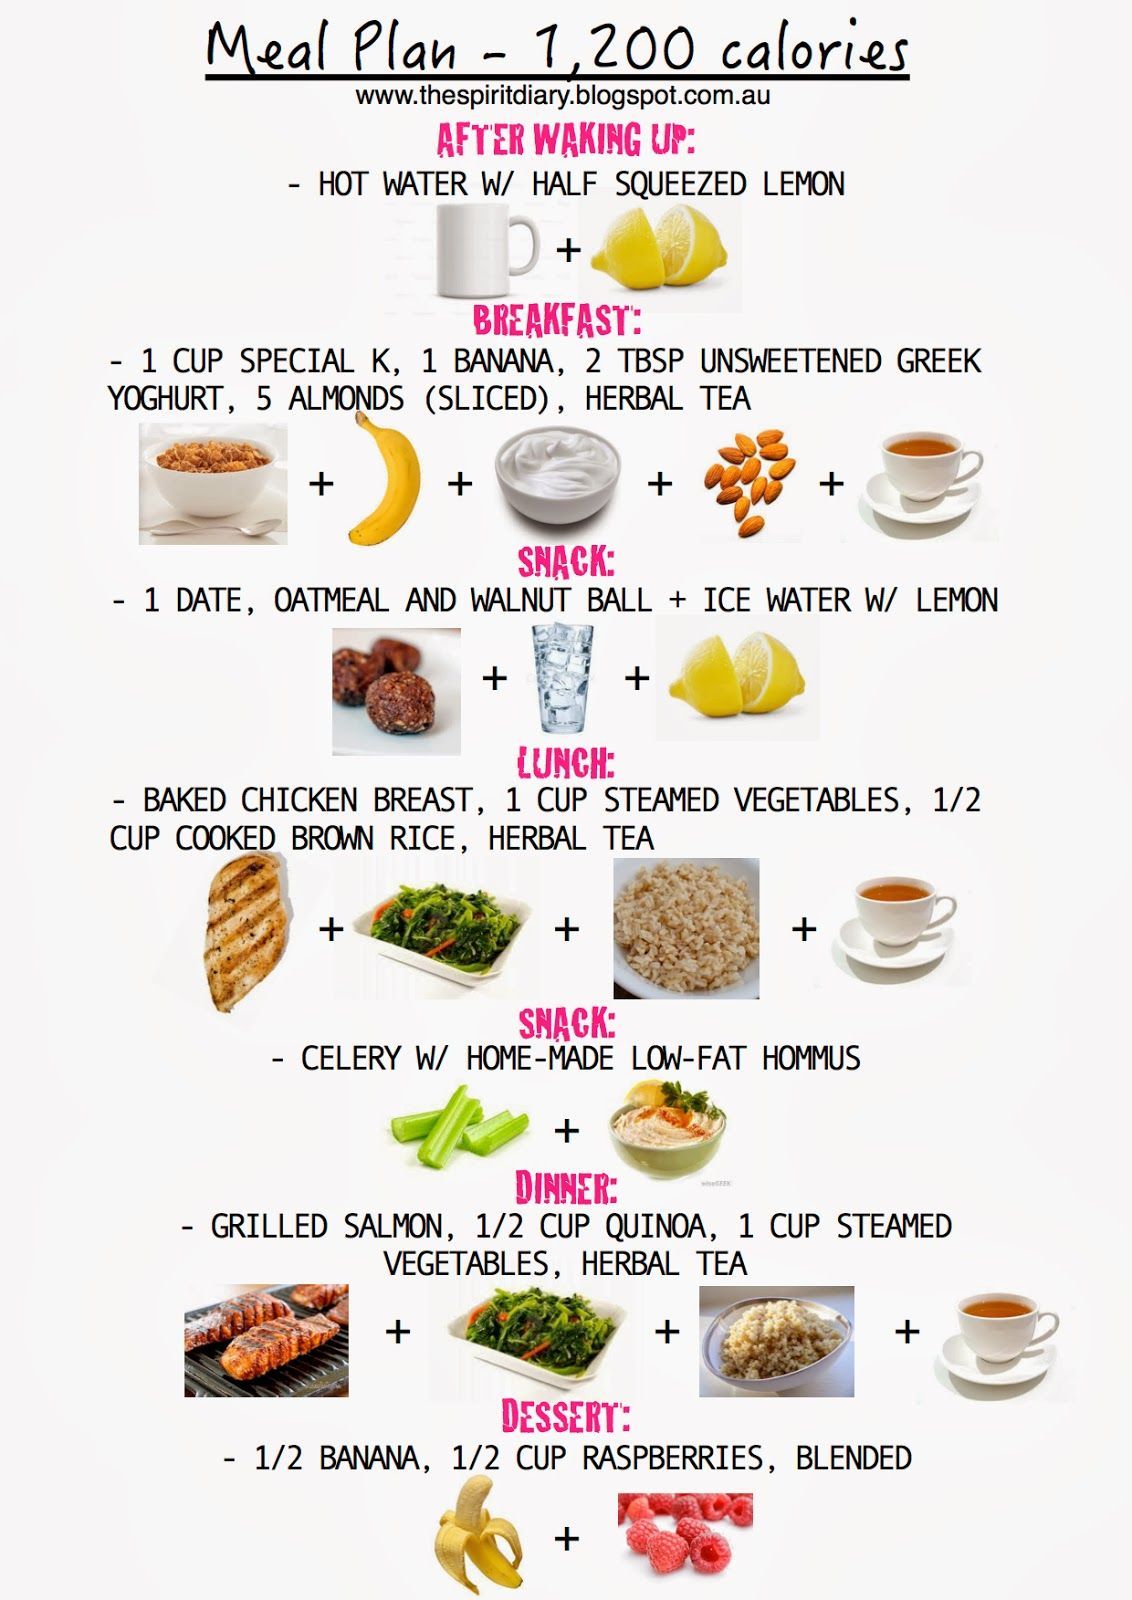 How to Use a Vegan Diet to Lose Weight -   17 repas 1200 calorie
 ideas